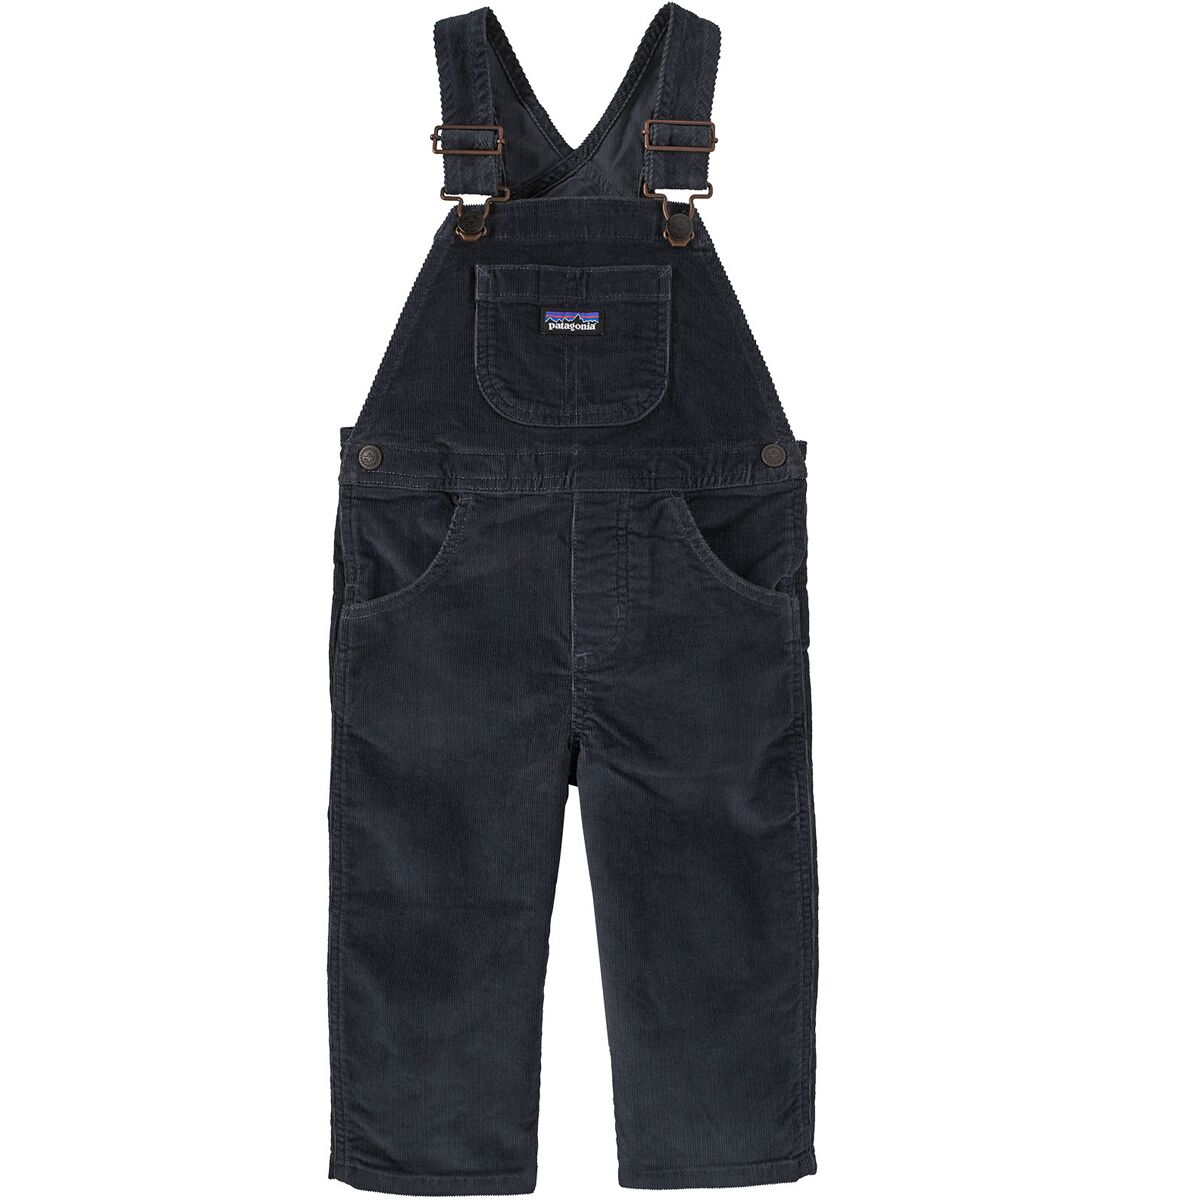 Patagonia Overall - Toddlers'